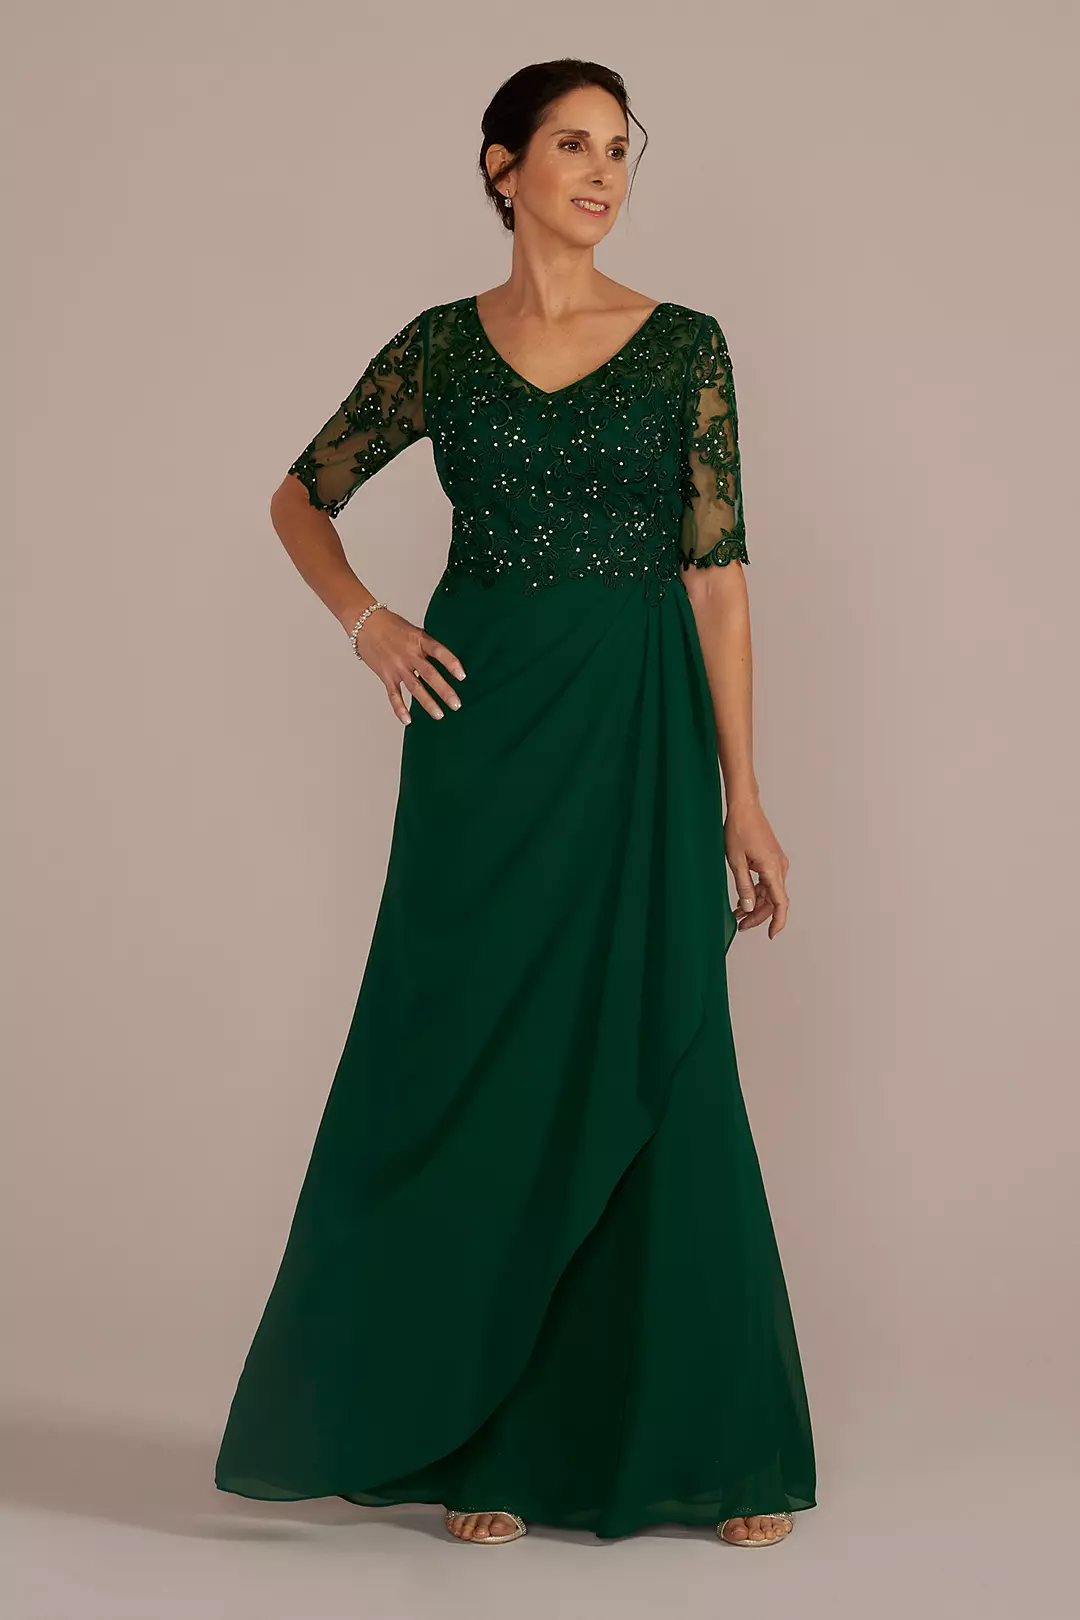 Chiffon and Lace Empire Waist Gown Image